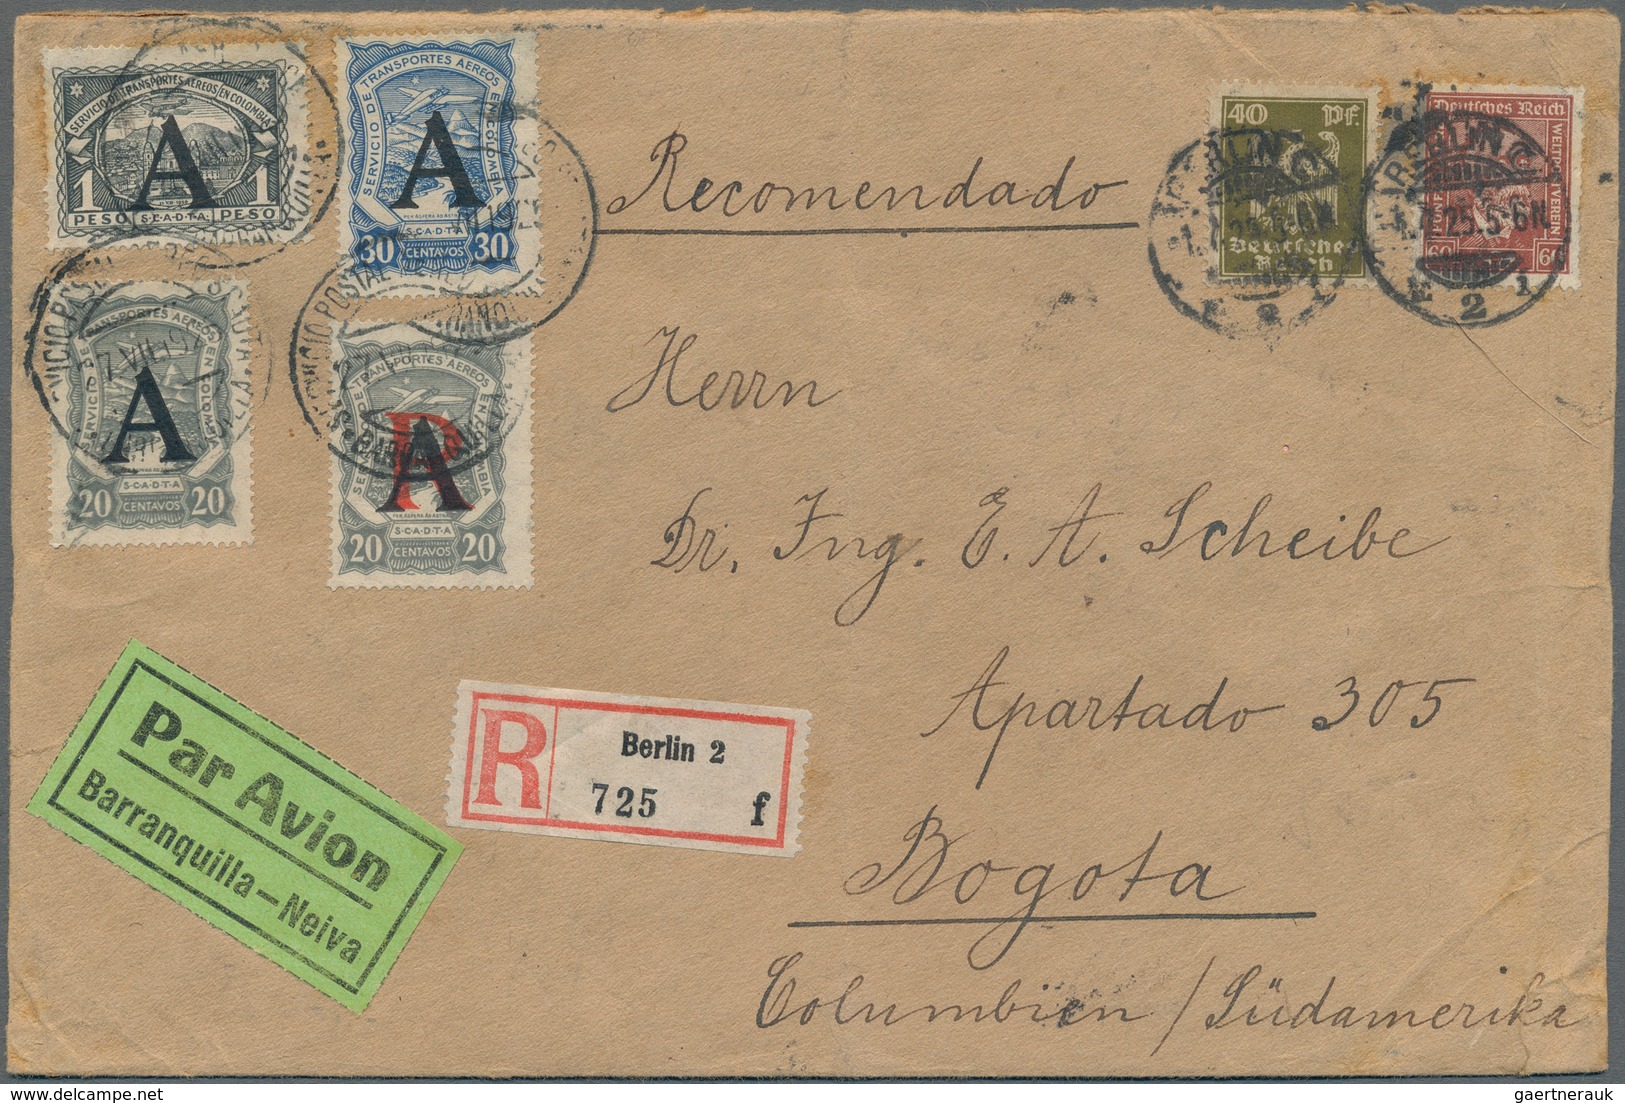 SCADTA - Länder-Aufdrucke: 1924/1925, GERMANY: Lot Of 5 Covers Franked With Scadta Overprints "A", C - Airplanes